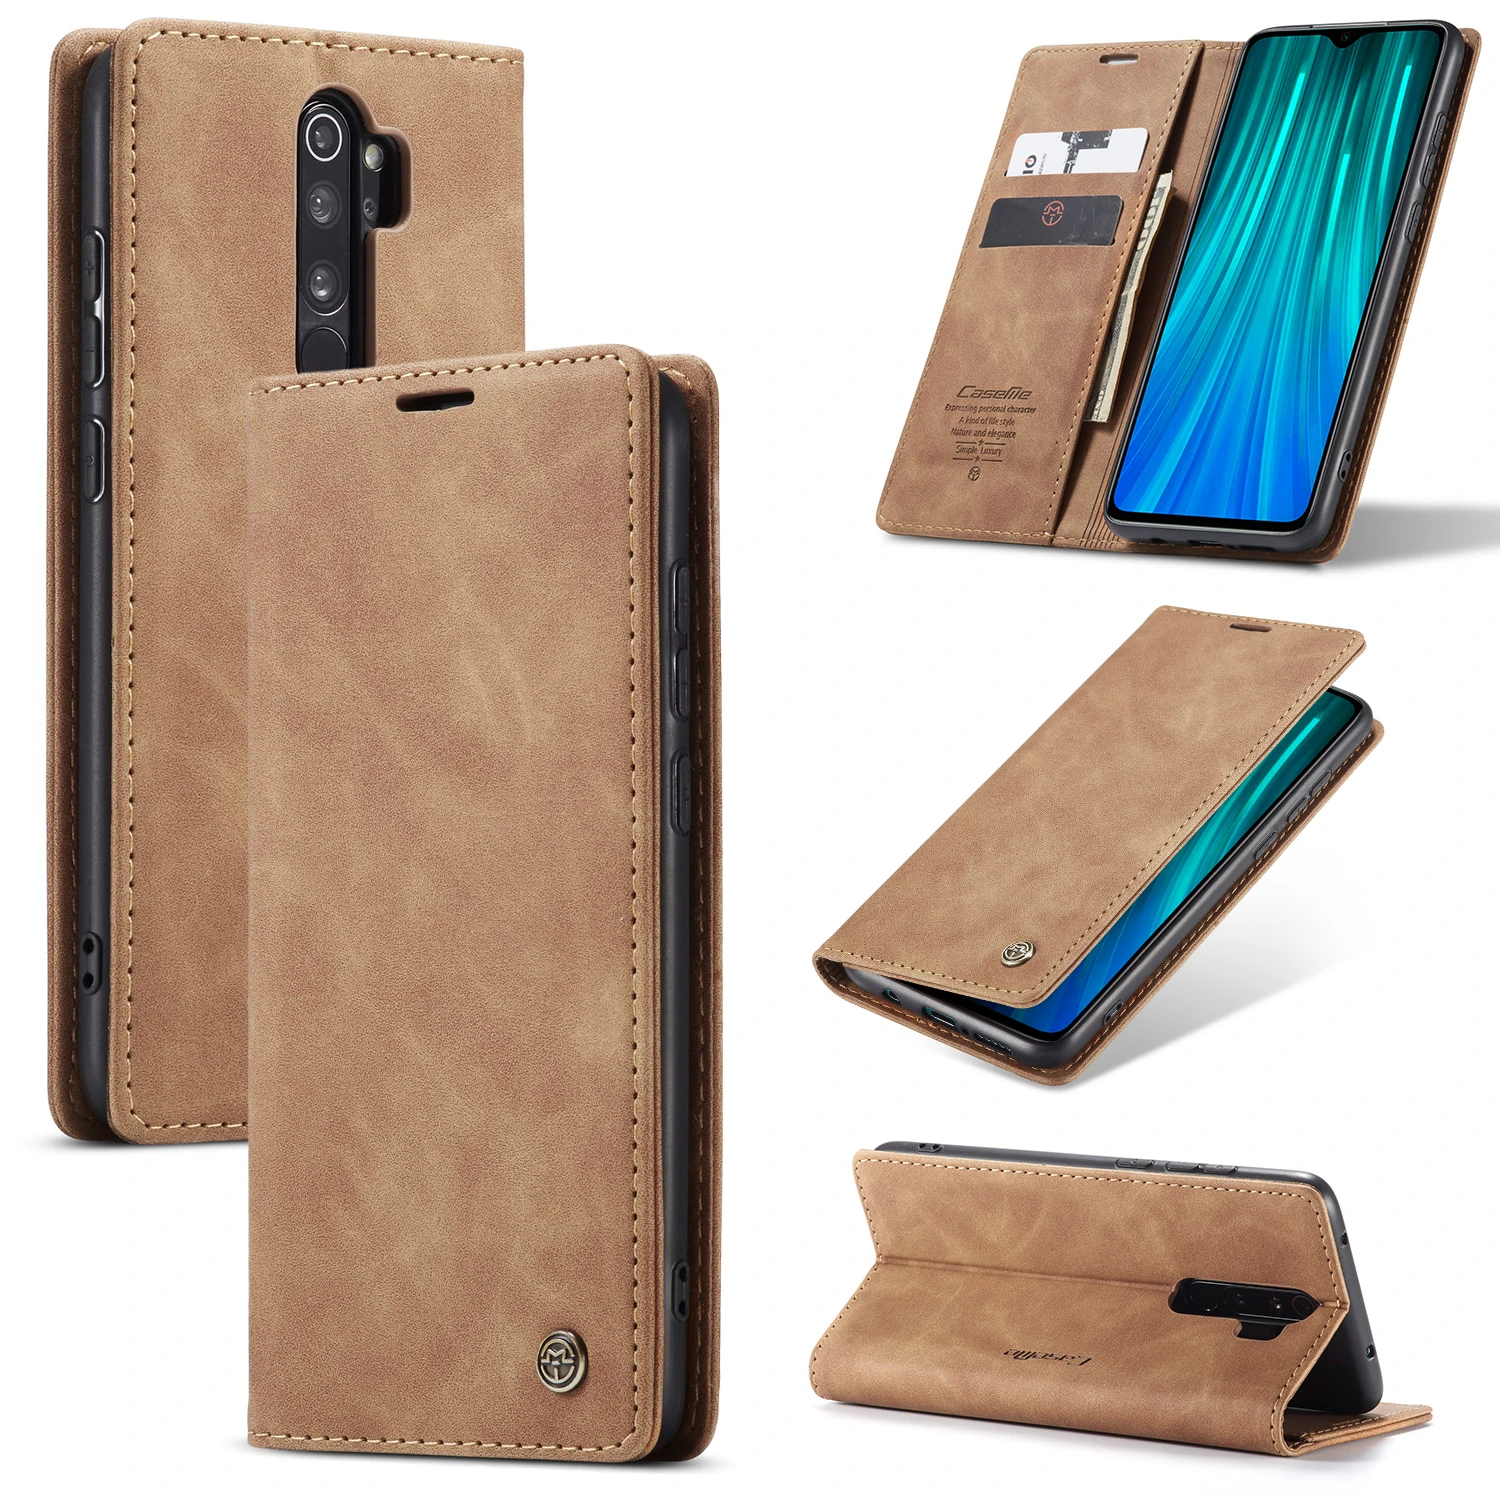 xiaomi leather case case Redmi Note 8 Case Wallet Fundas For Xiaomi Redmi Note 8 Pro 8Pro Note8 Cover Luxury PU Leather Flip Magnetic Stand Coque housing xiaomi leather case cosmos blue